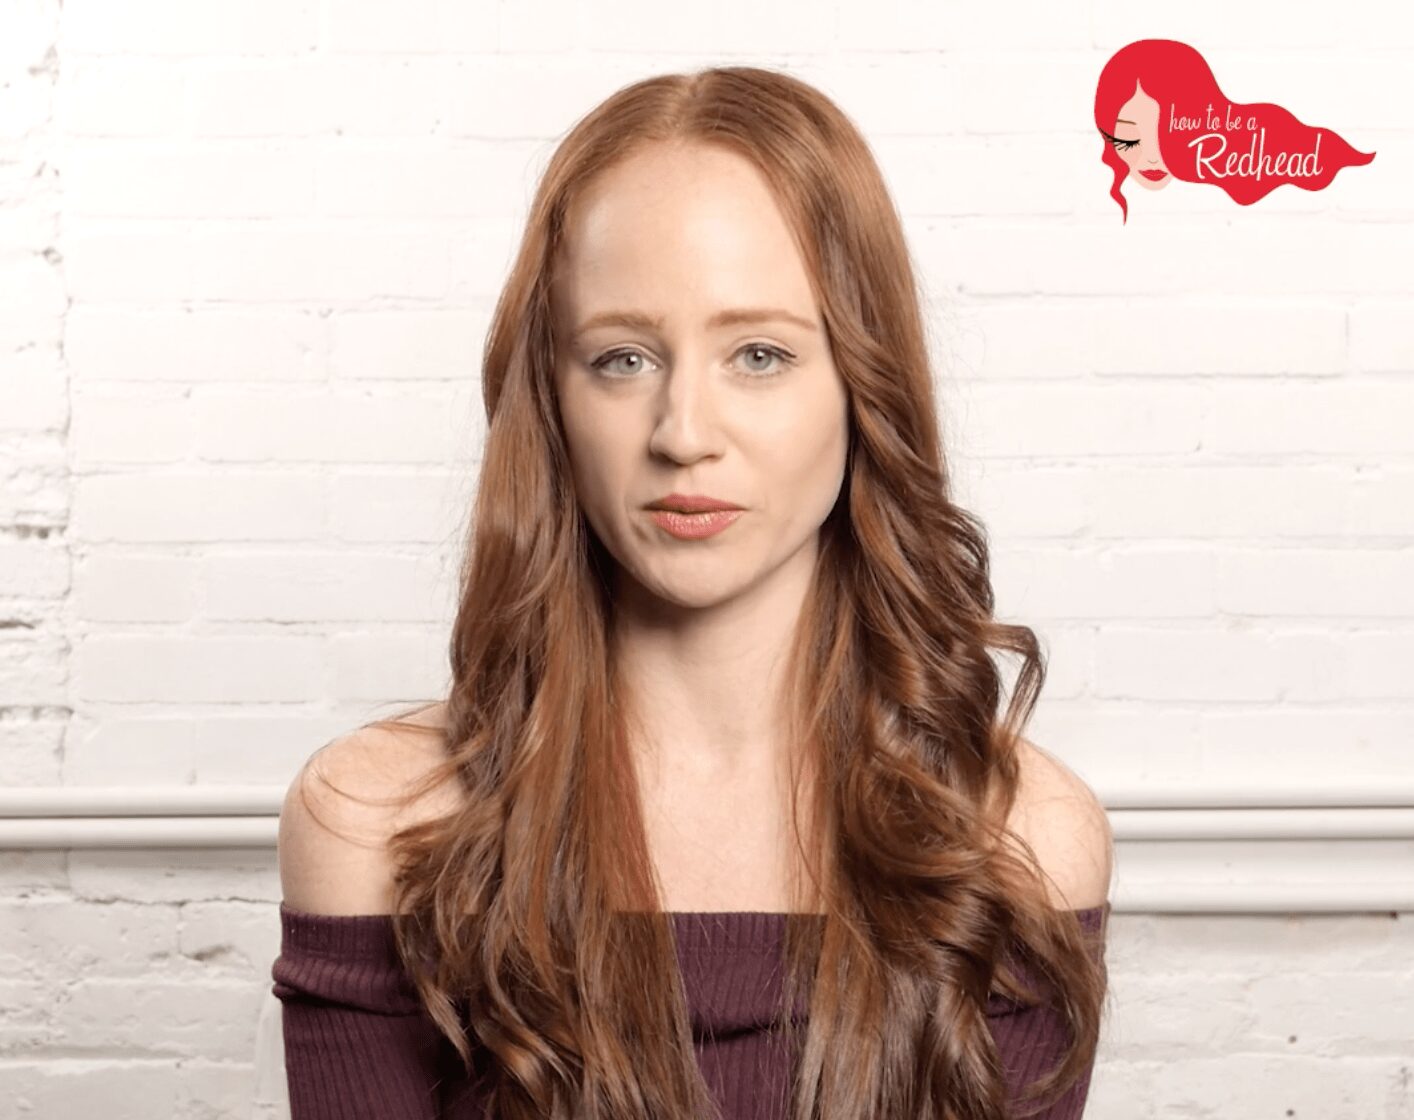 13 Fascinating Facts About Redheads Everyone Should Know